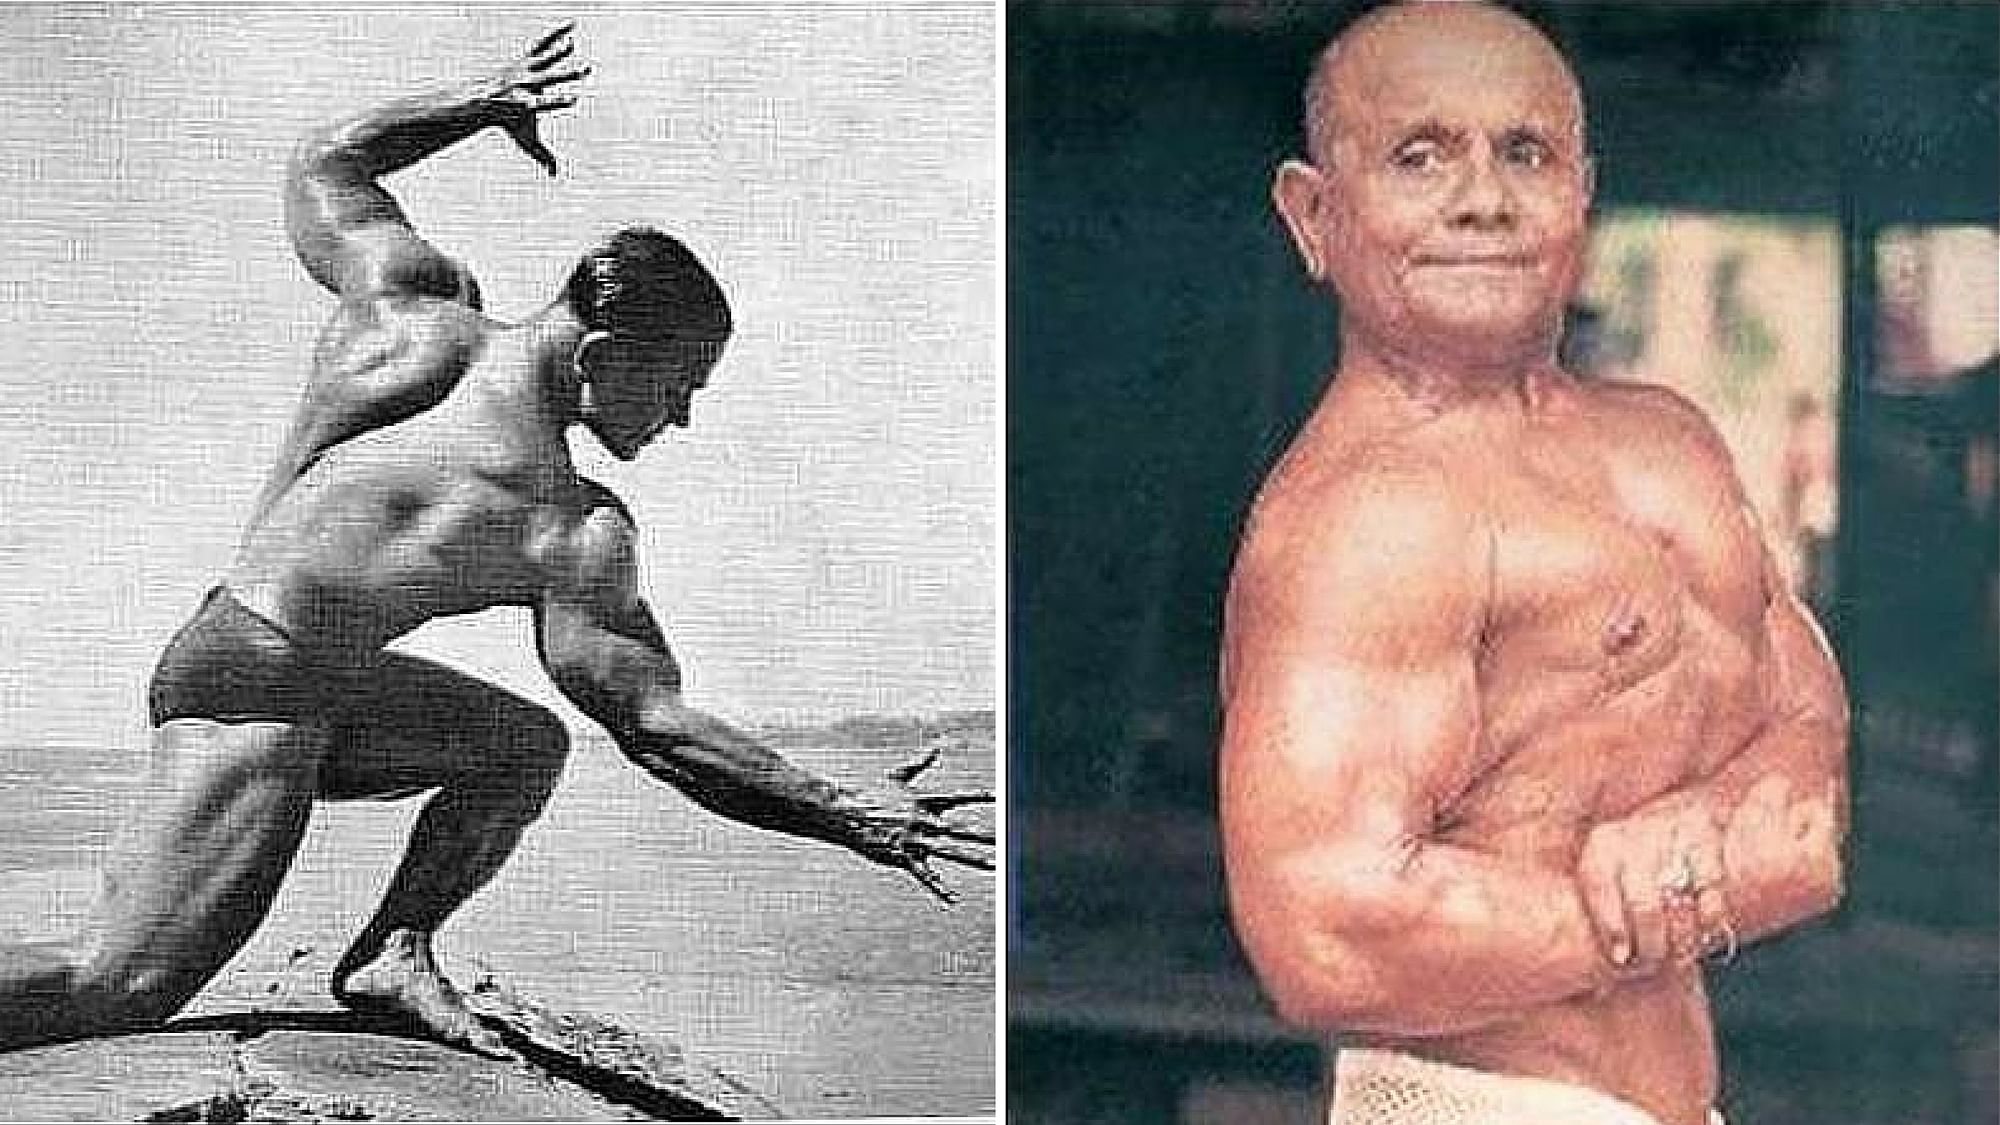 He was called ‘Pocket Hercules’ for his short frame of 4 feet 11 inches. (Photo Courtesy: <a href="https://www.facebook.com/Manohar-Aich-the-MrUniverse-1952-1466789126868768/photos">Facebook/Manohar Aich</a>)